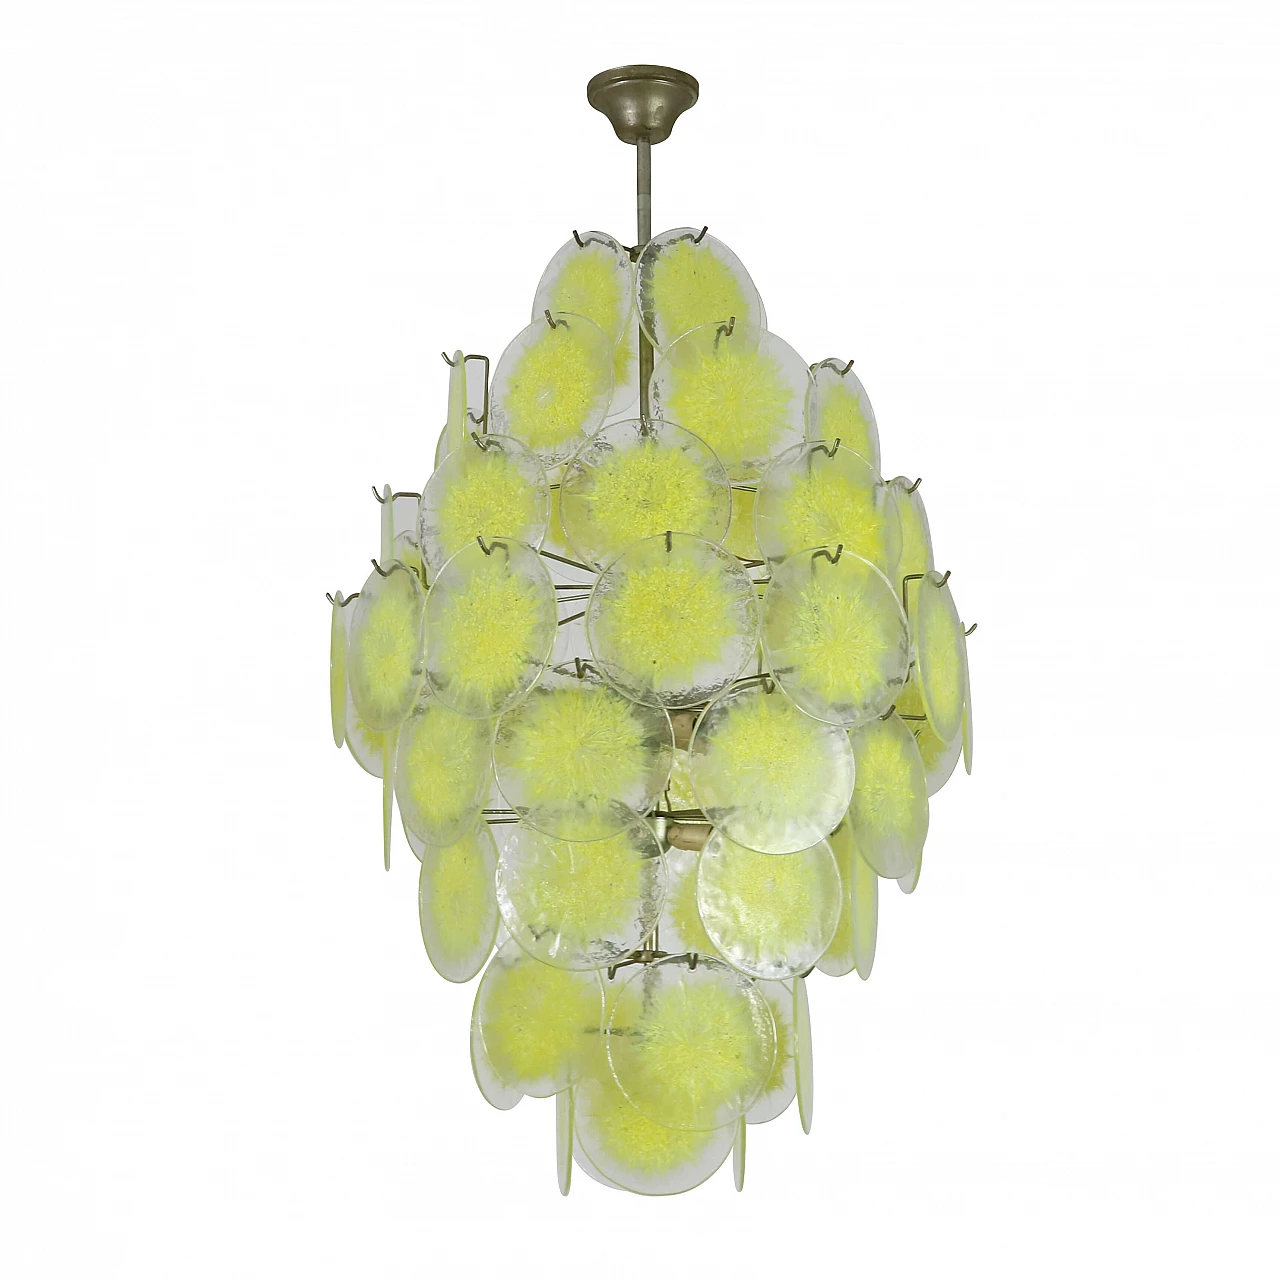 Chandelier with yellow glass discs, 1950s 1202866